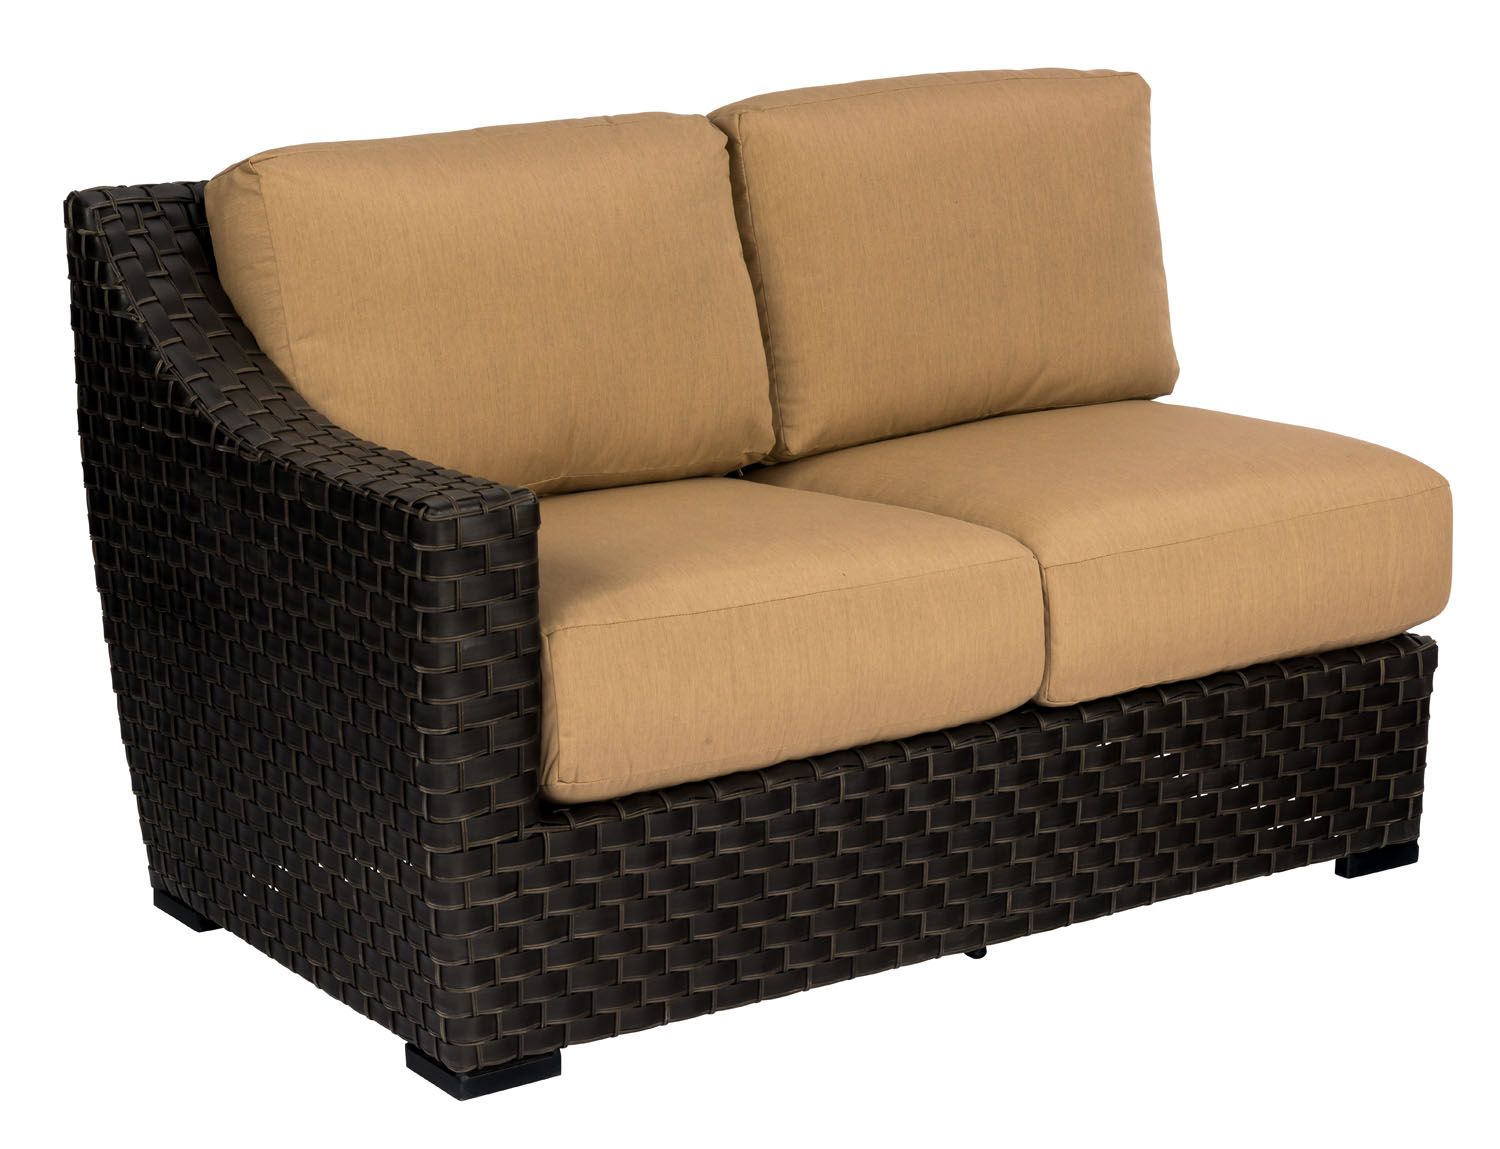 Cooper LAF Love Seat Sectional Unit By Woodard